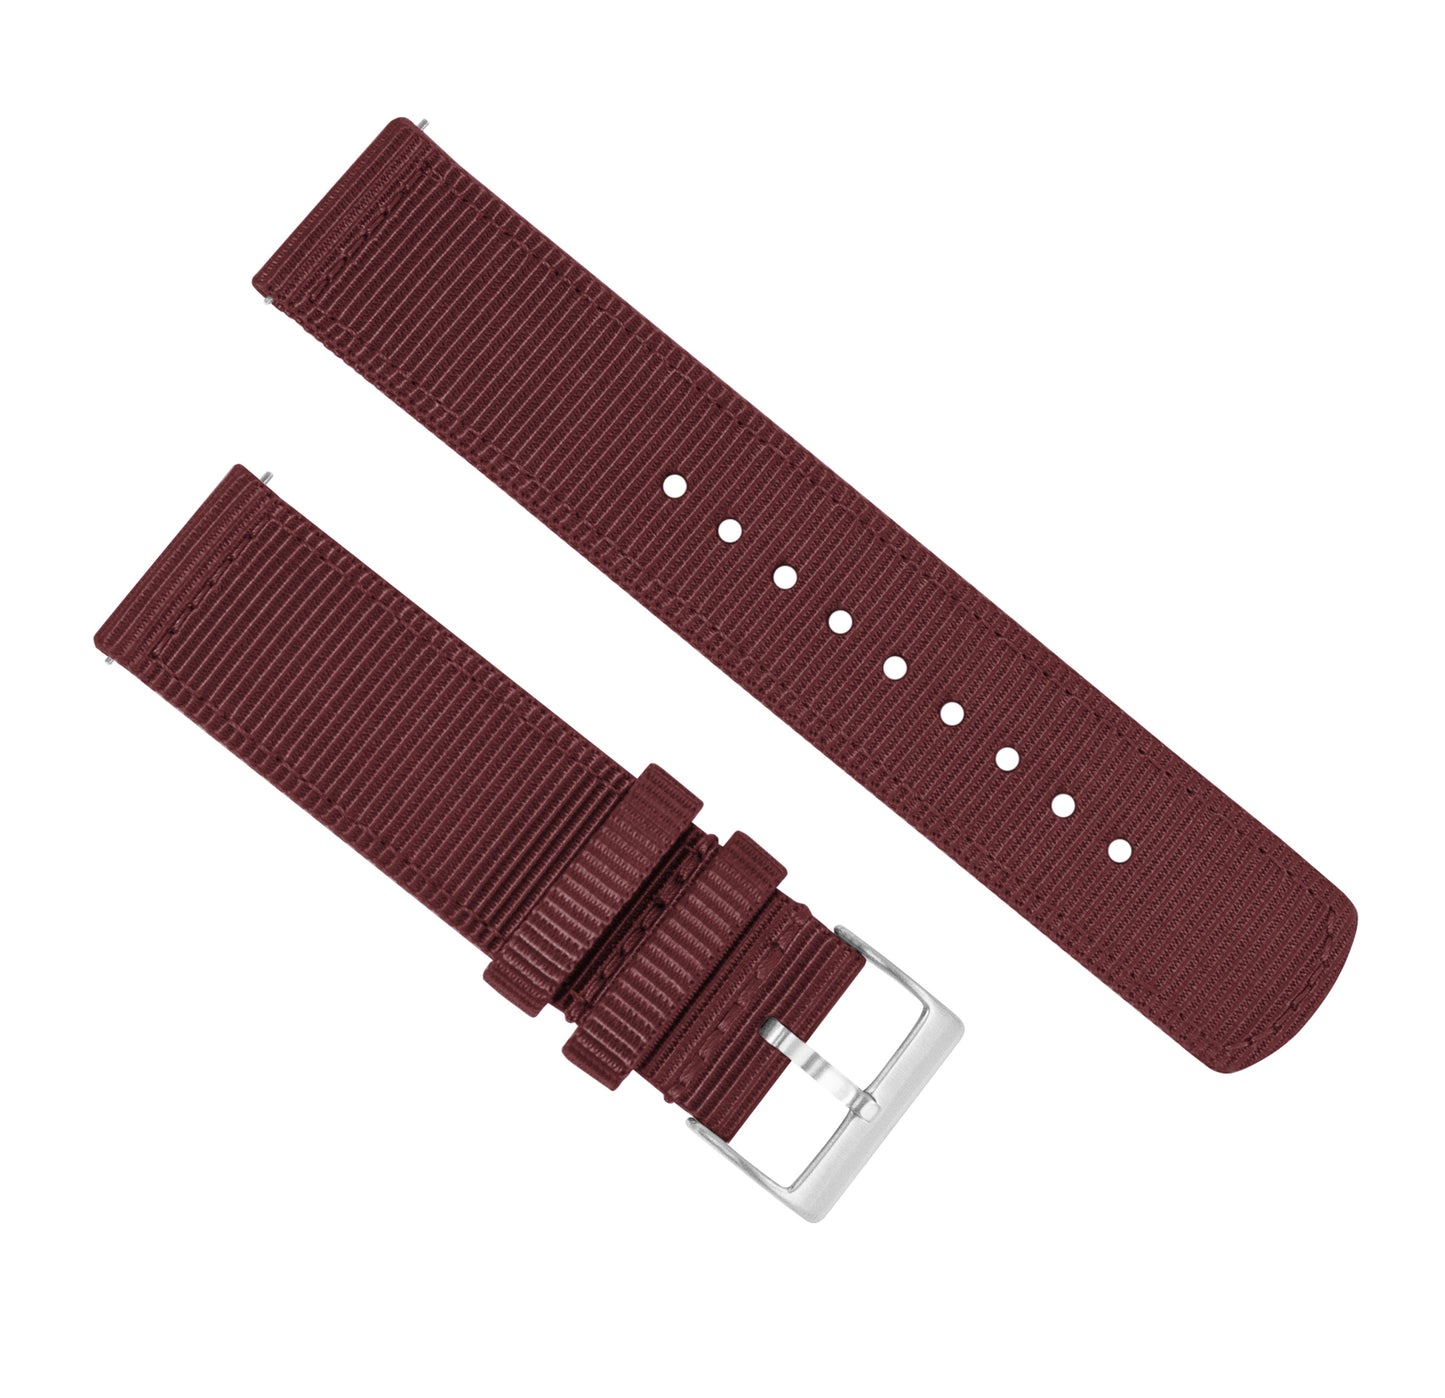 Fossil Q | Two-Piece NATO Style | Merlot - Barton Watch Bands